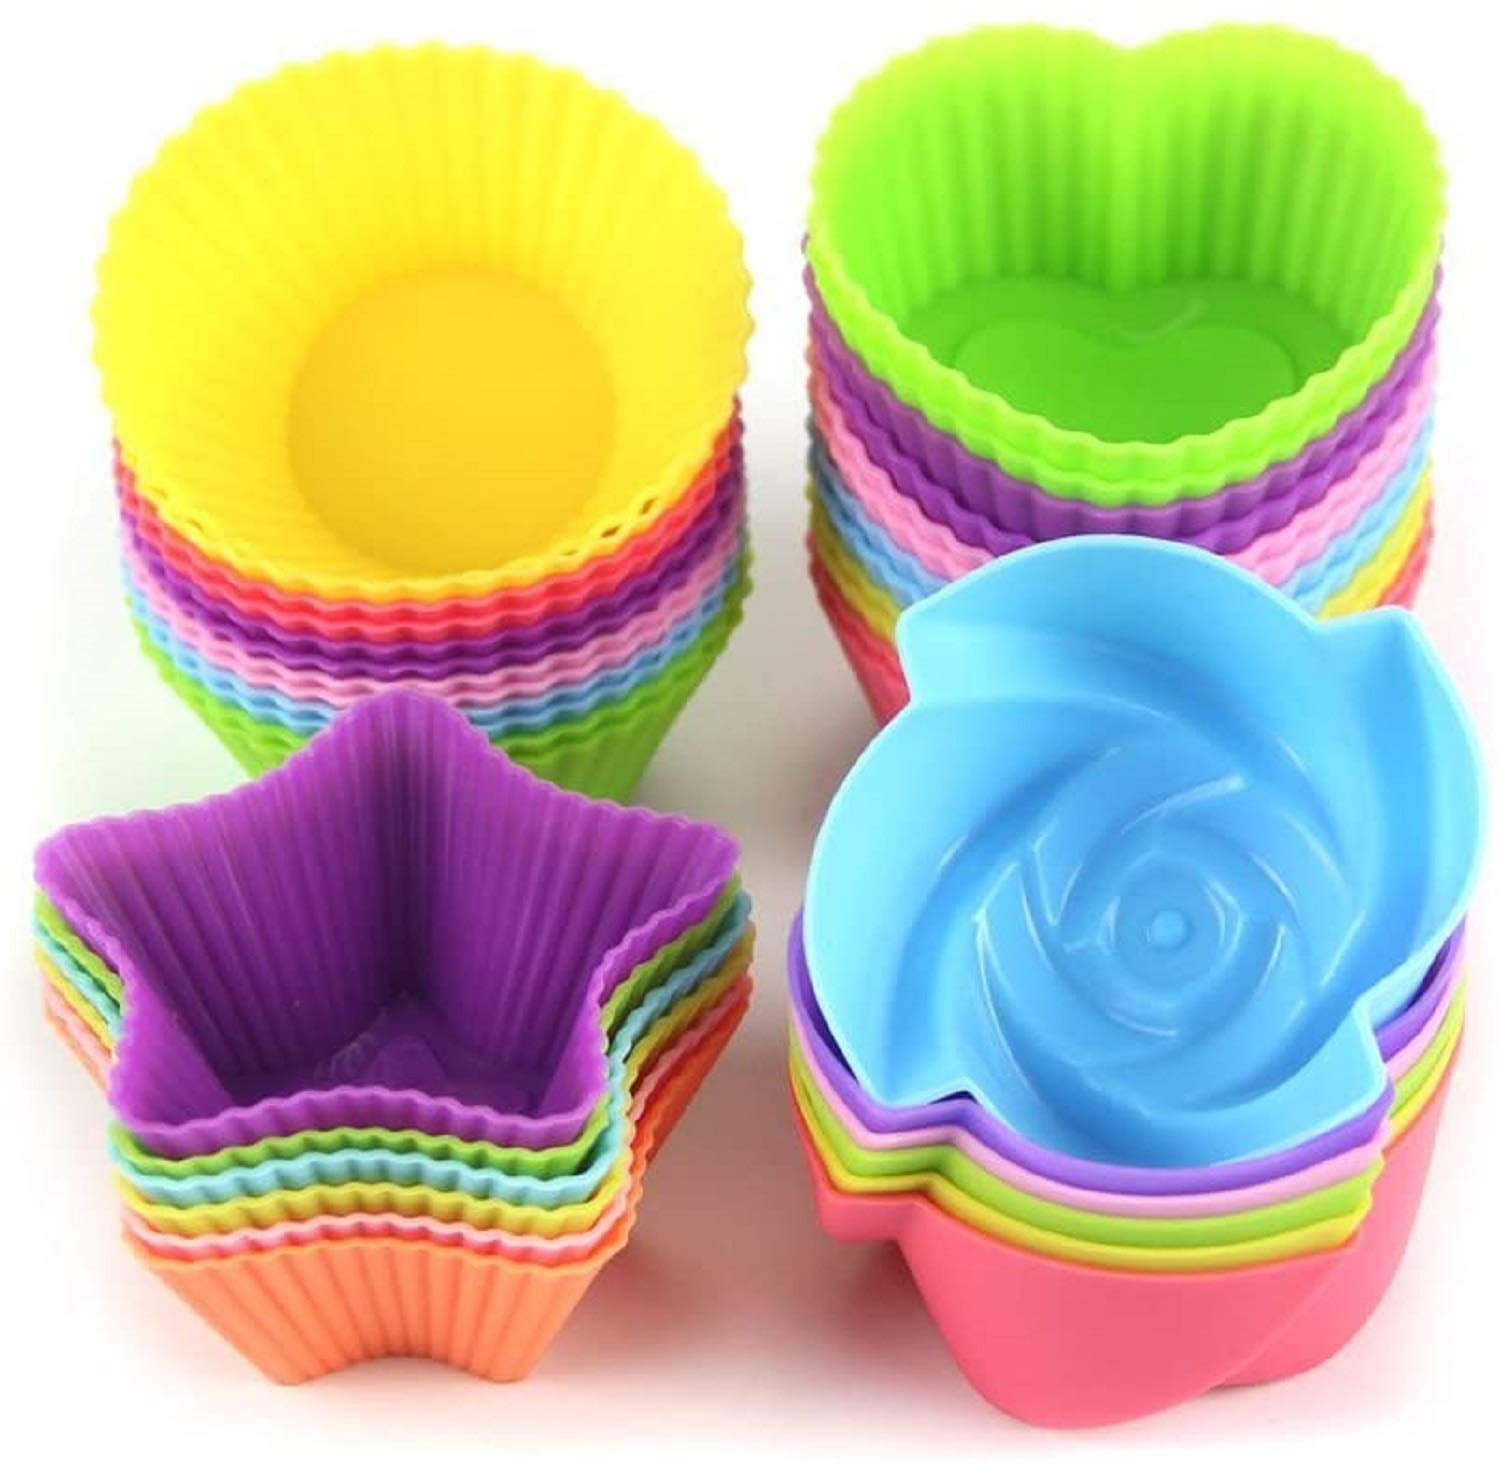 Silicone Cupcake Holders Bake Muffin Dessert Baking Chocolate Cups Mold 4PCS 